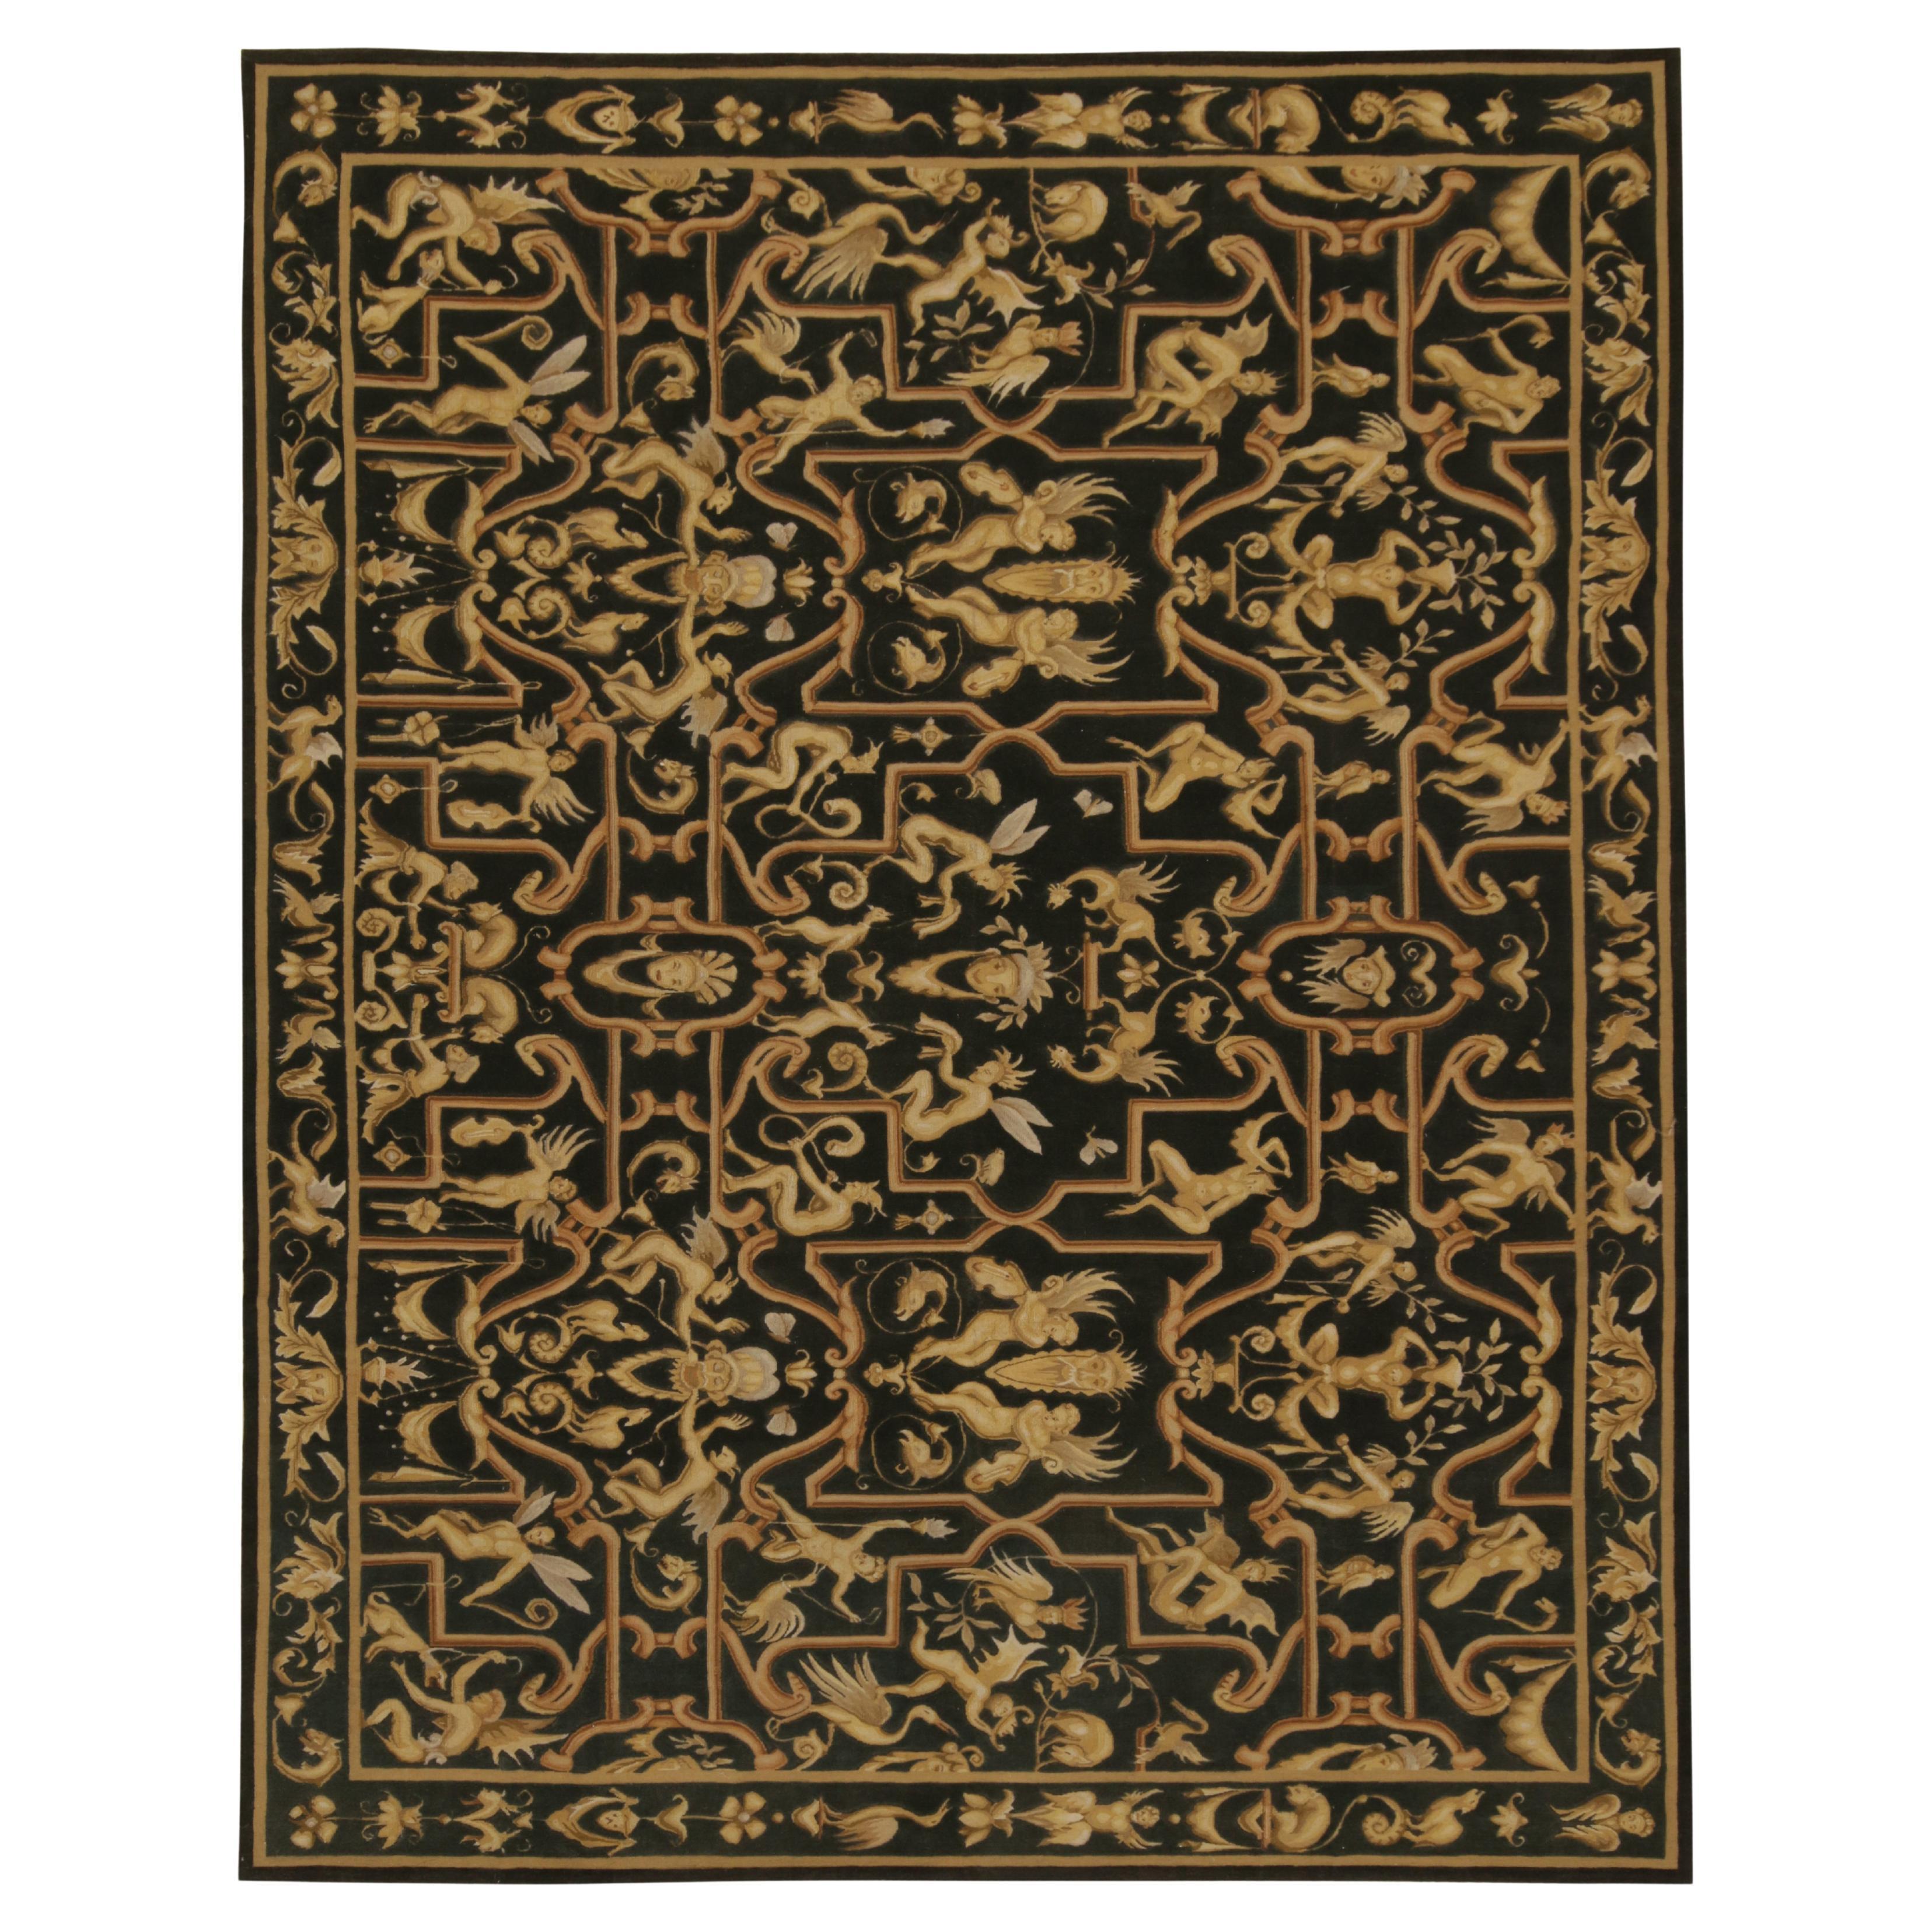 Rug & Kilim’s European Tudor style Flat Weave in Black with Gold Pictorial